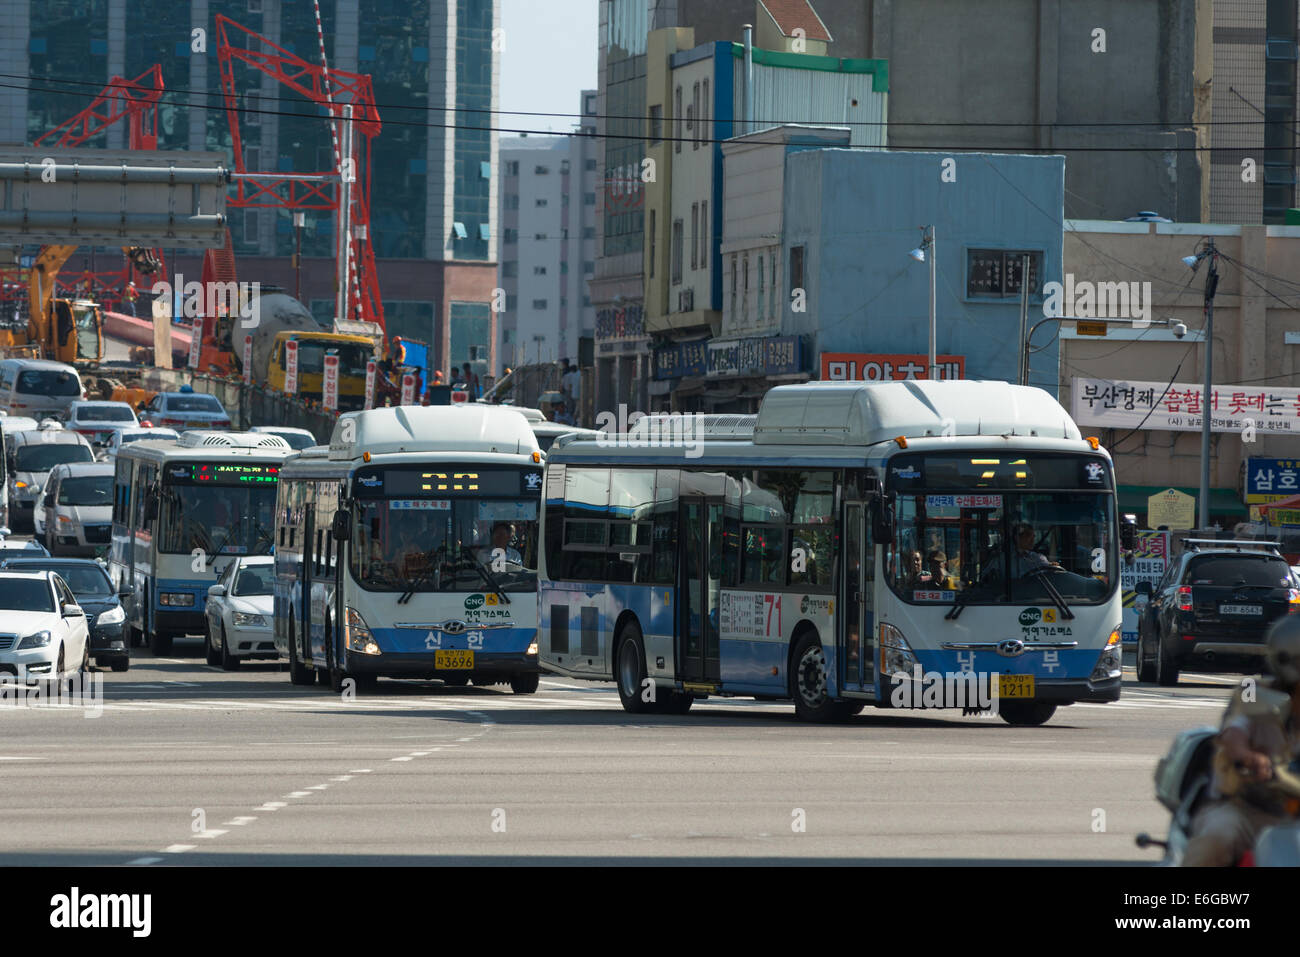 Buses on busy street in Busan, South Korea Stock Photo